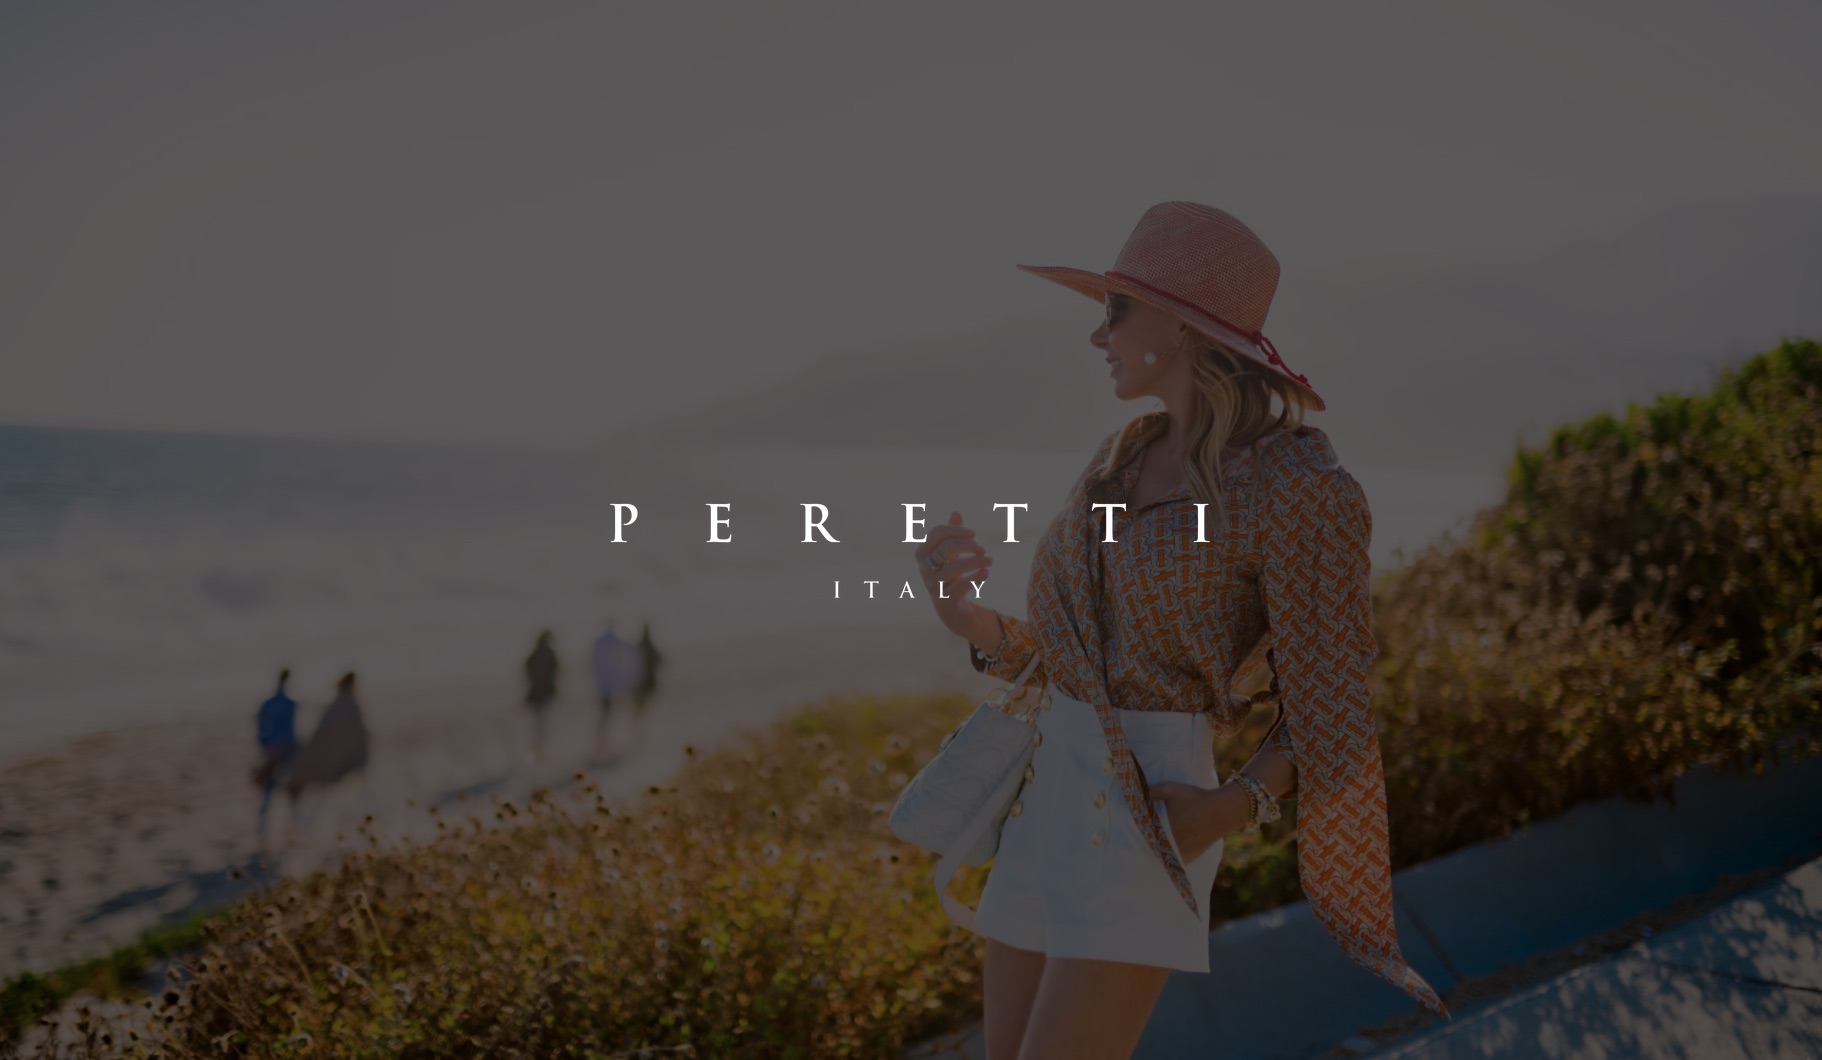 White Peretti Italy title with dimmed background side profile of woman wearing short white skirt, patterned top, red hat and shades standing by the beach